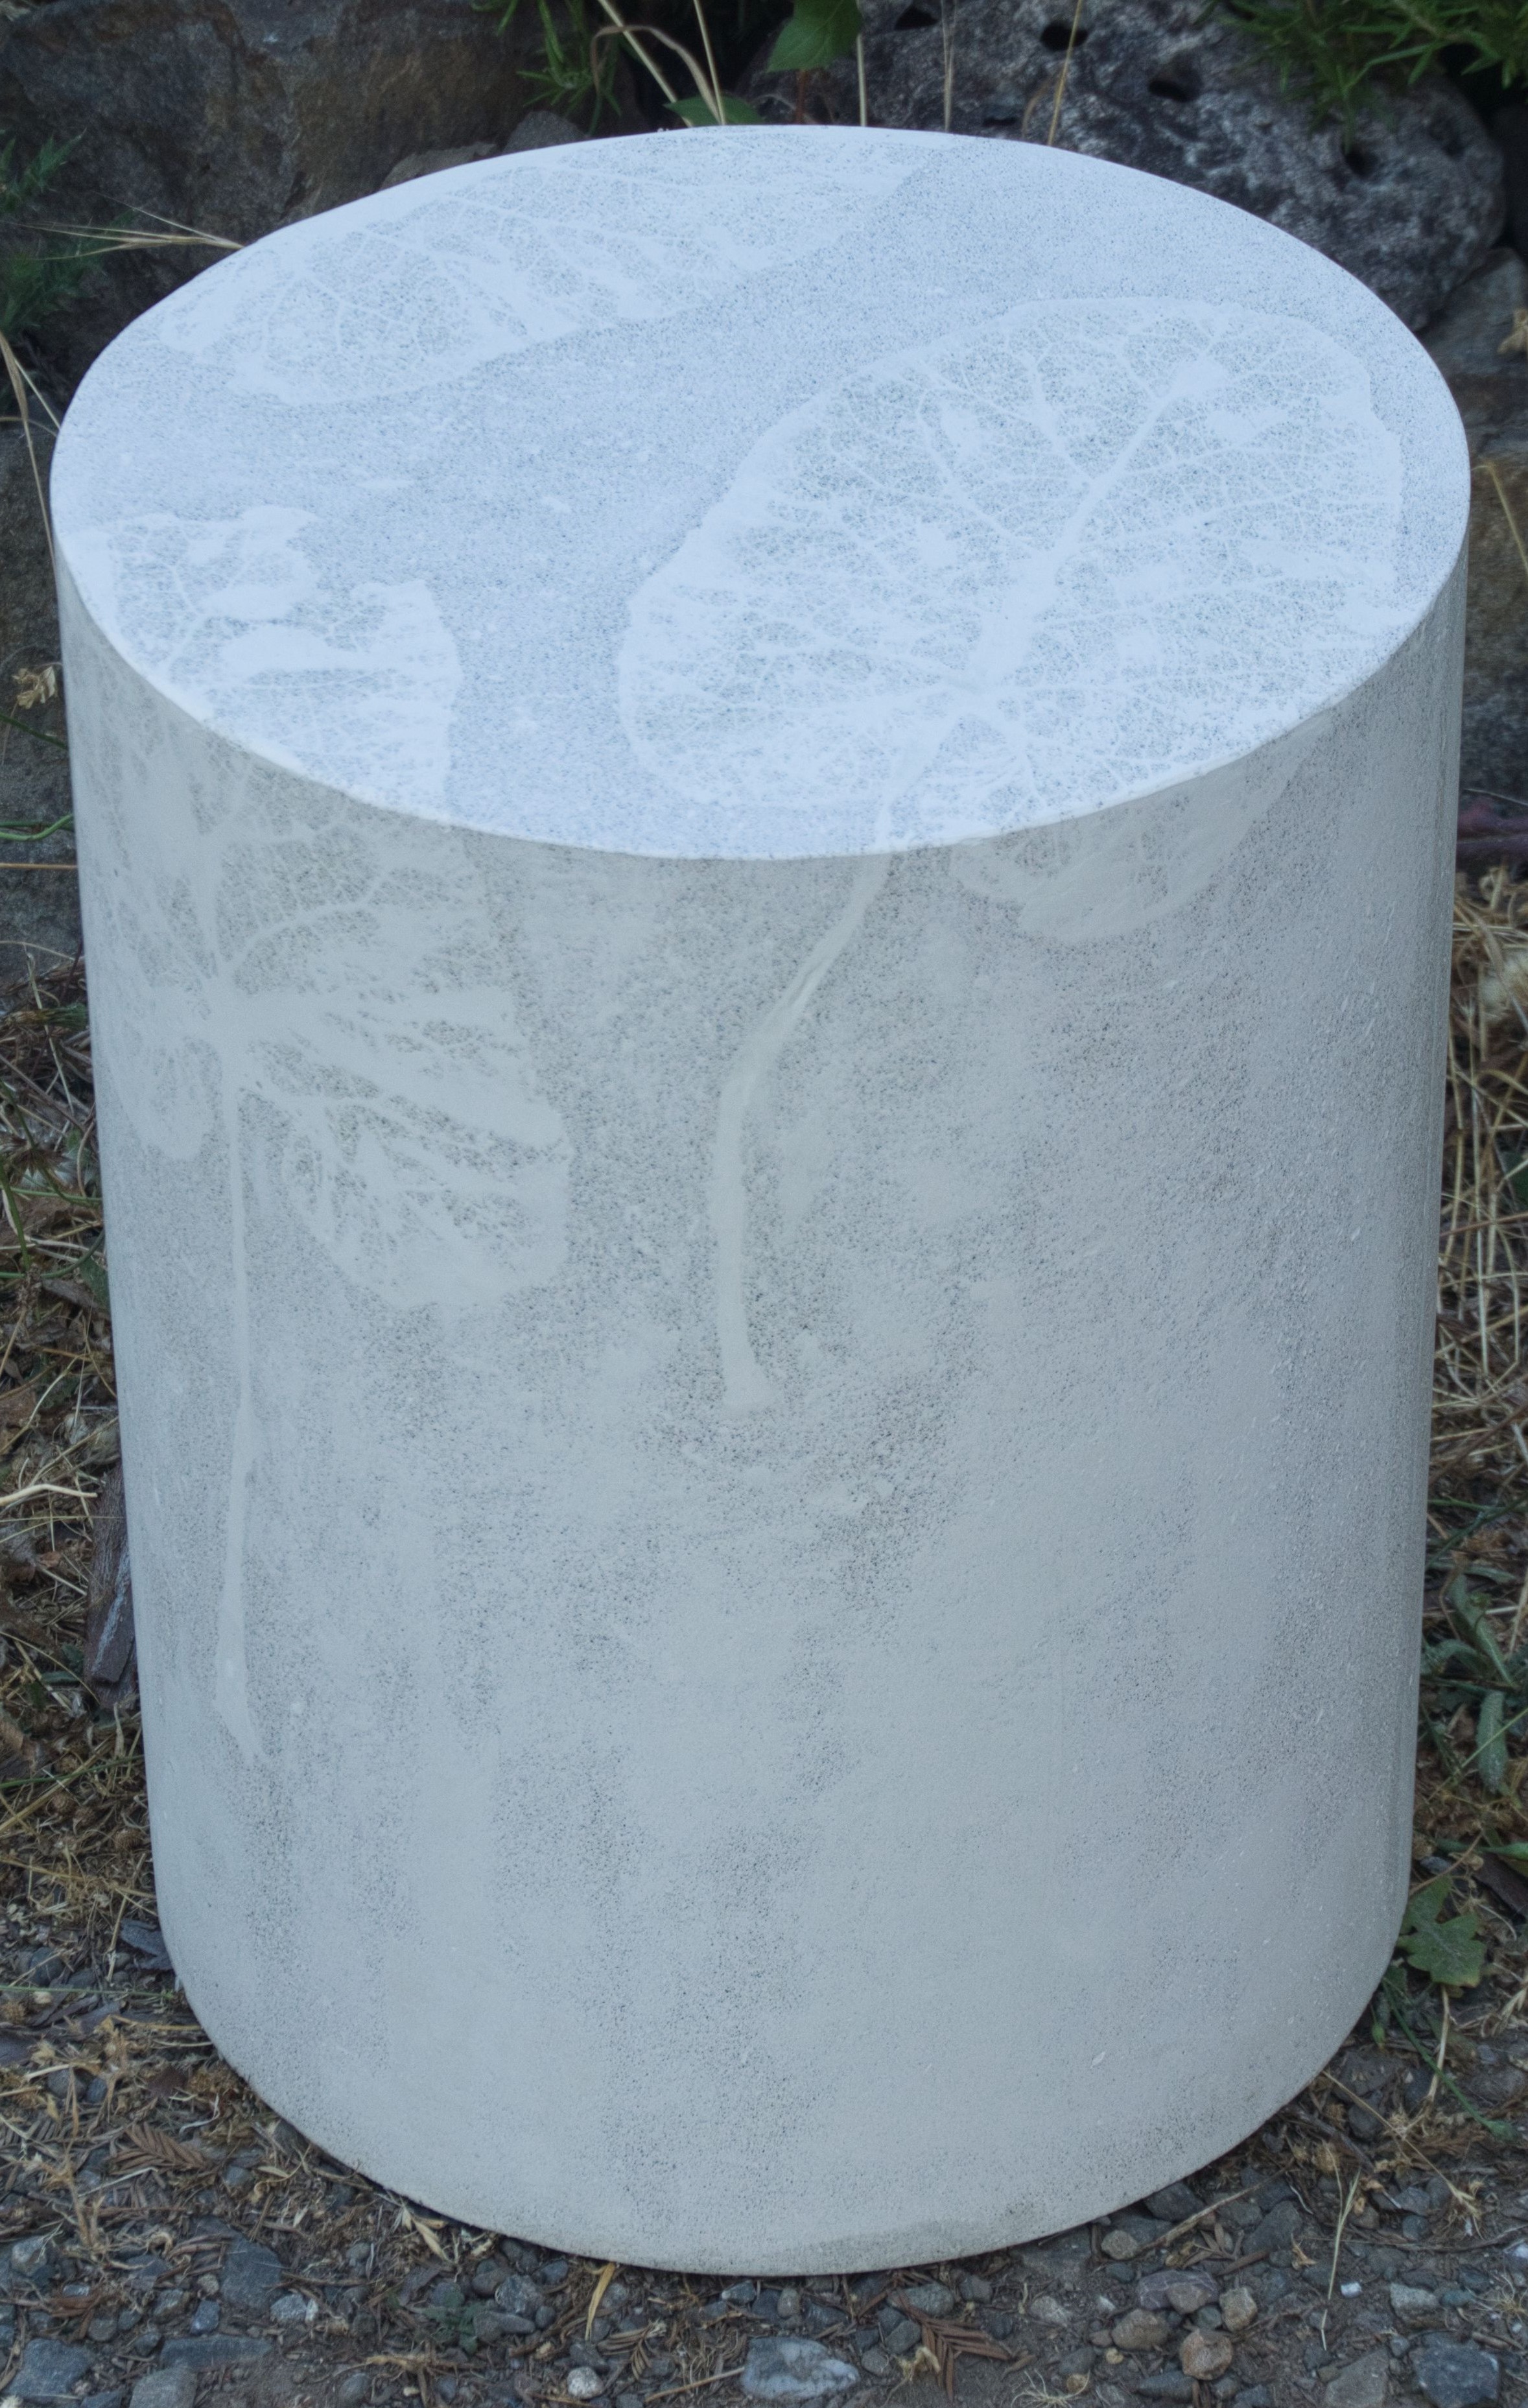 white round concrete stool with subtle white leaf design on top and sides